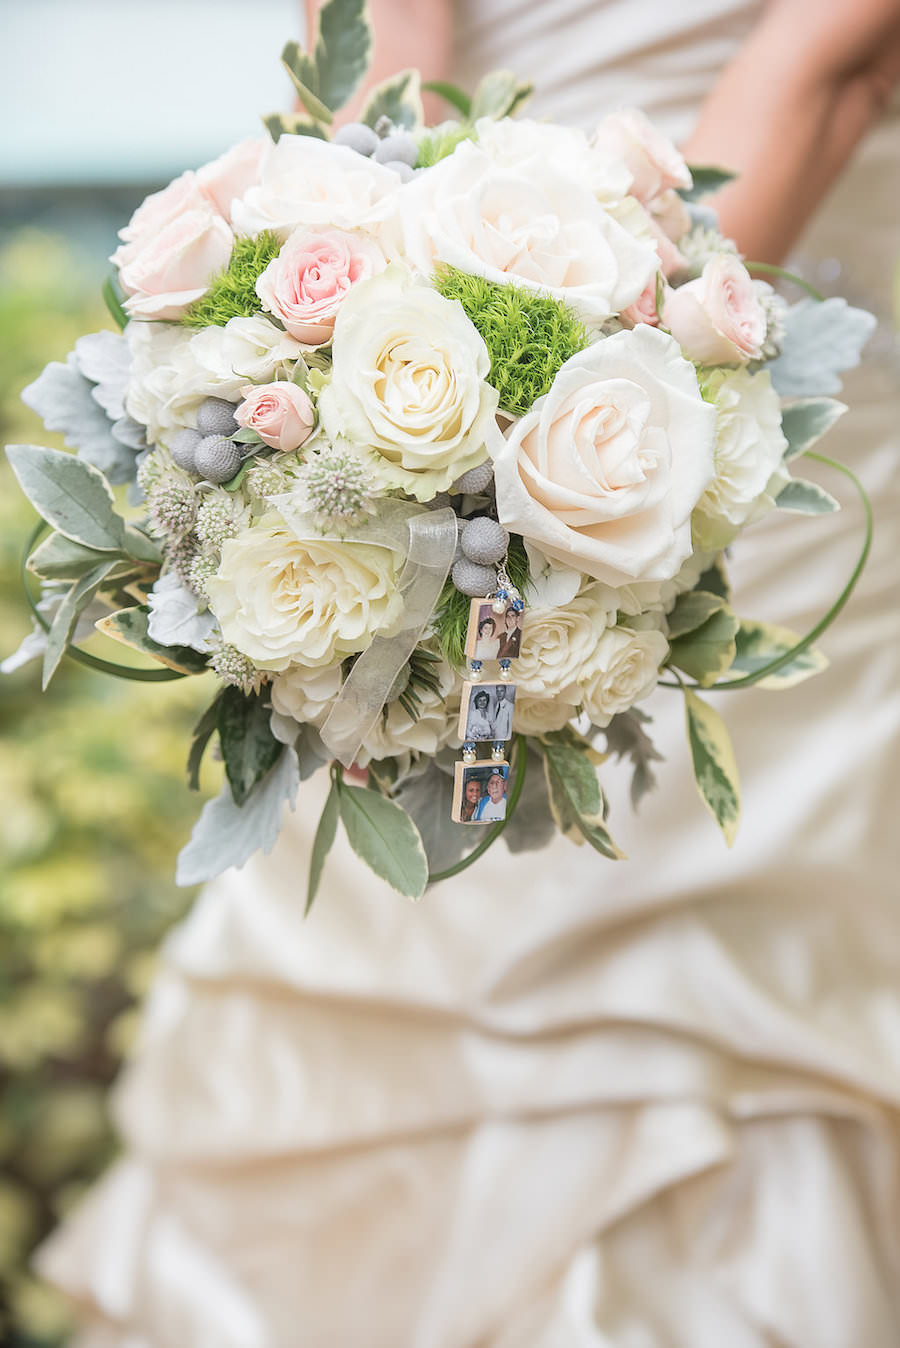 Rustic, Vintage White Rose Wedding Bouquet with Greenery and Memory Charm